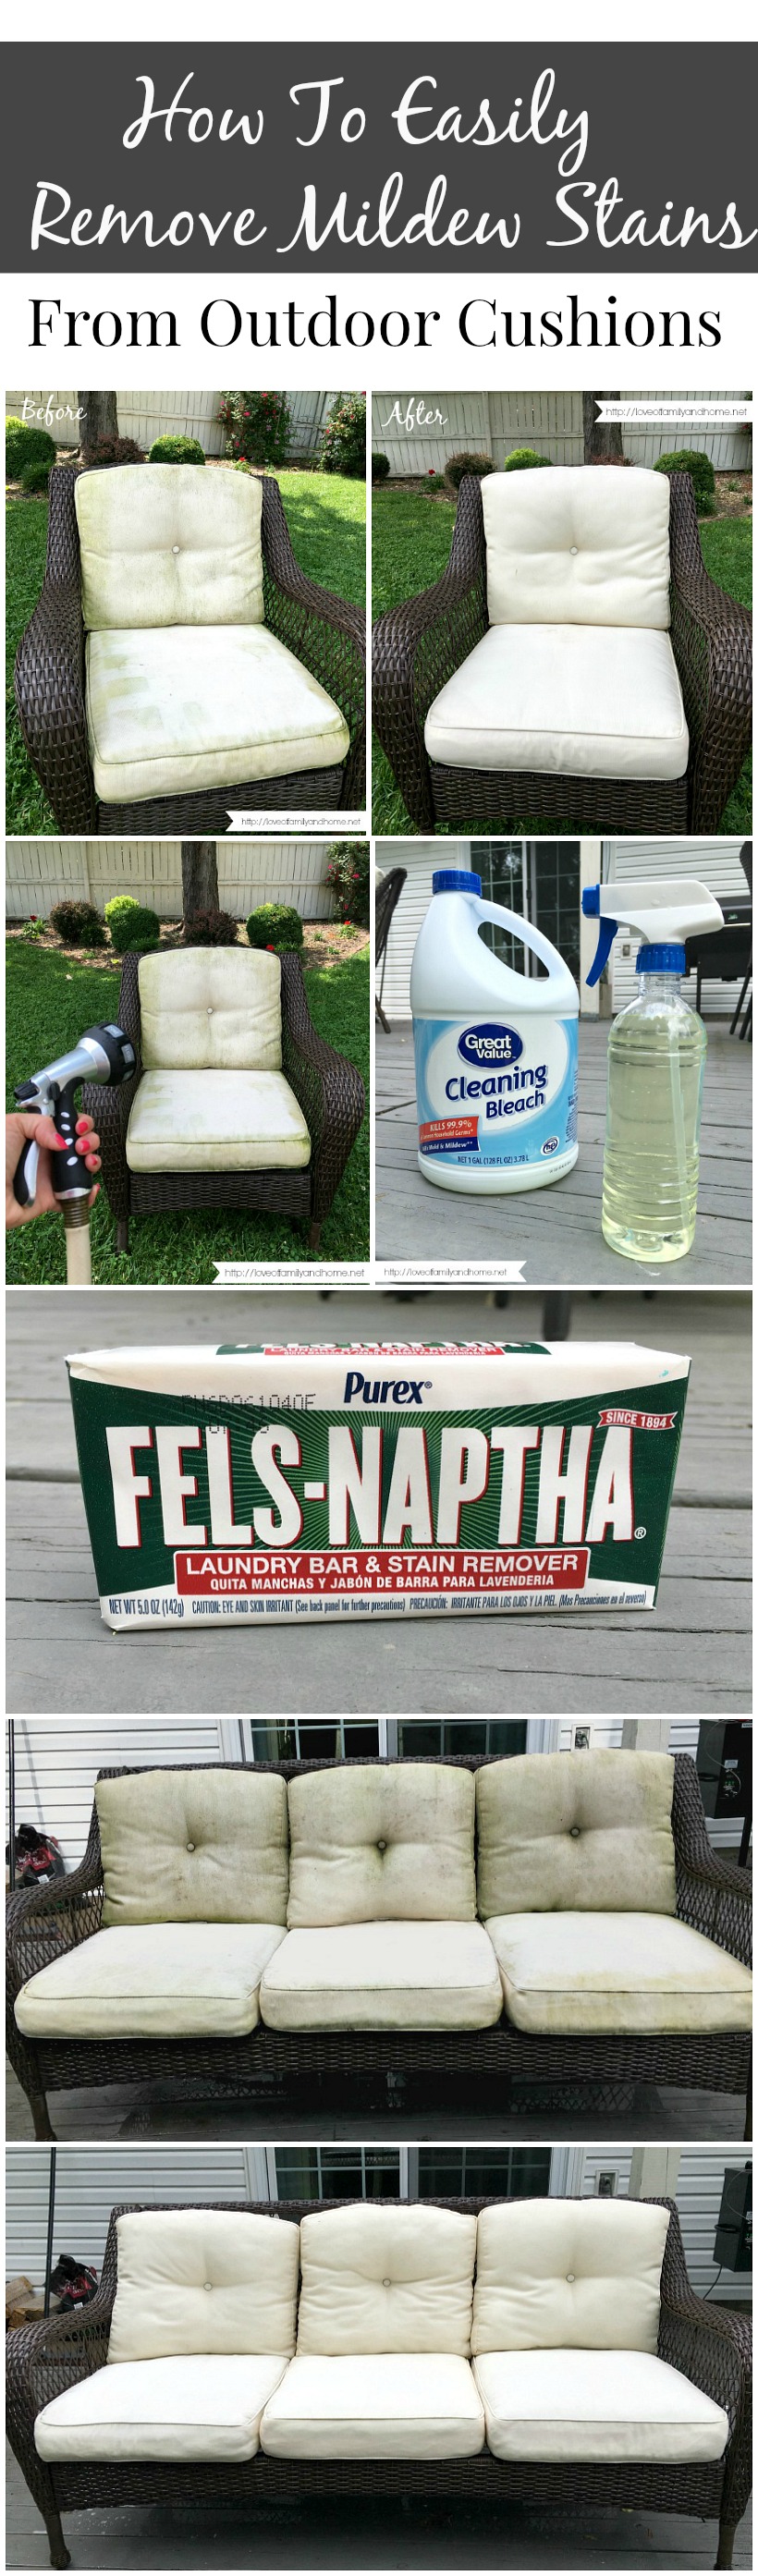 Remove Mildew Stains From Outdoor Cushions, How To Get Mold Out Of Outdoor Cushion Covers